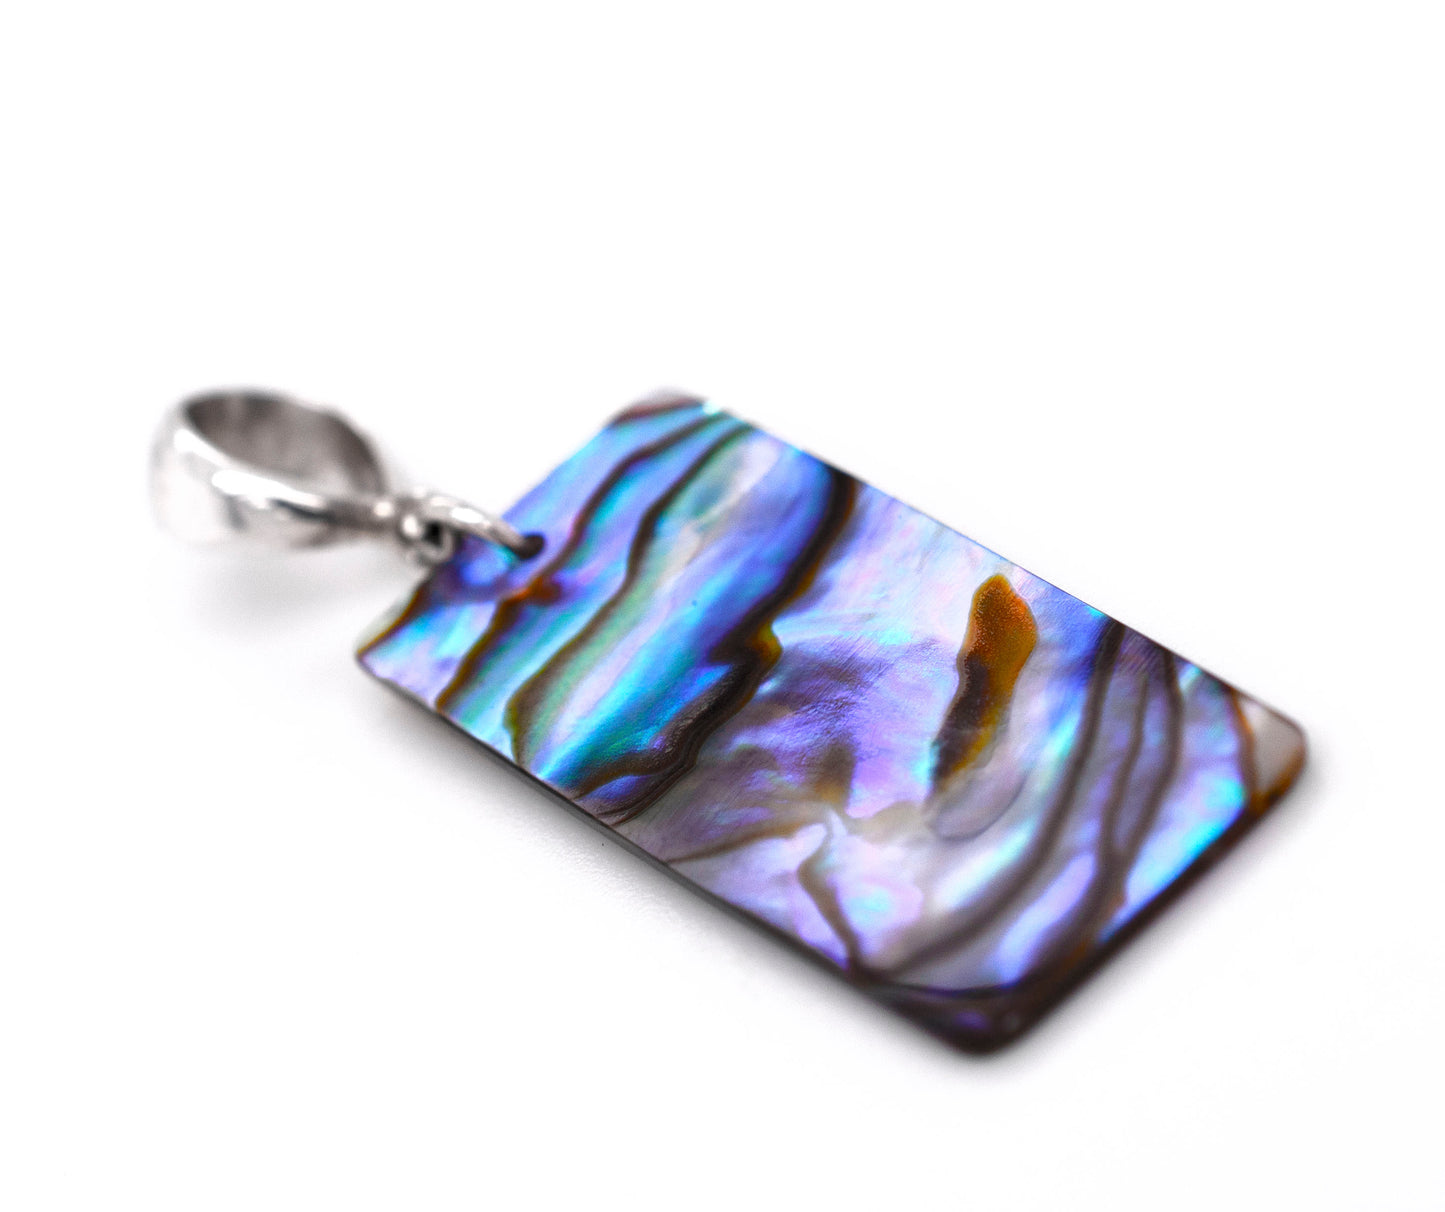 A Super Silver Rectangular Abalone Slab Pendant on a white background.